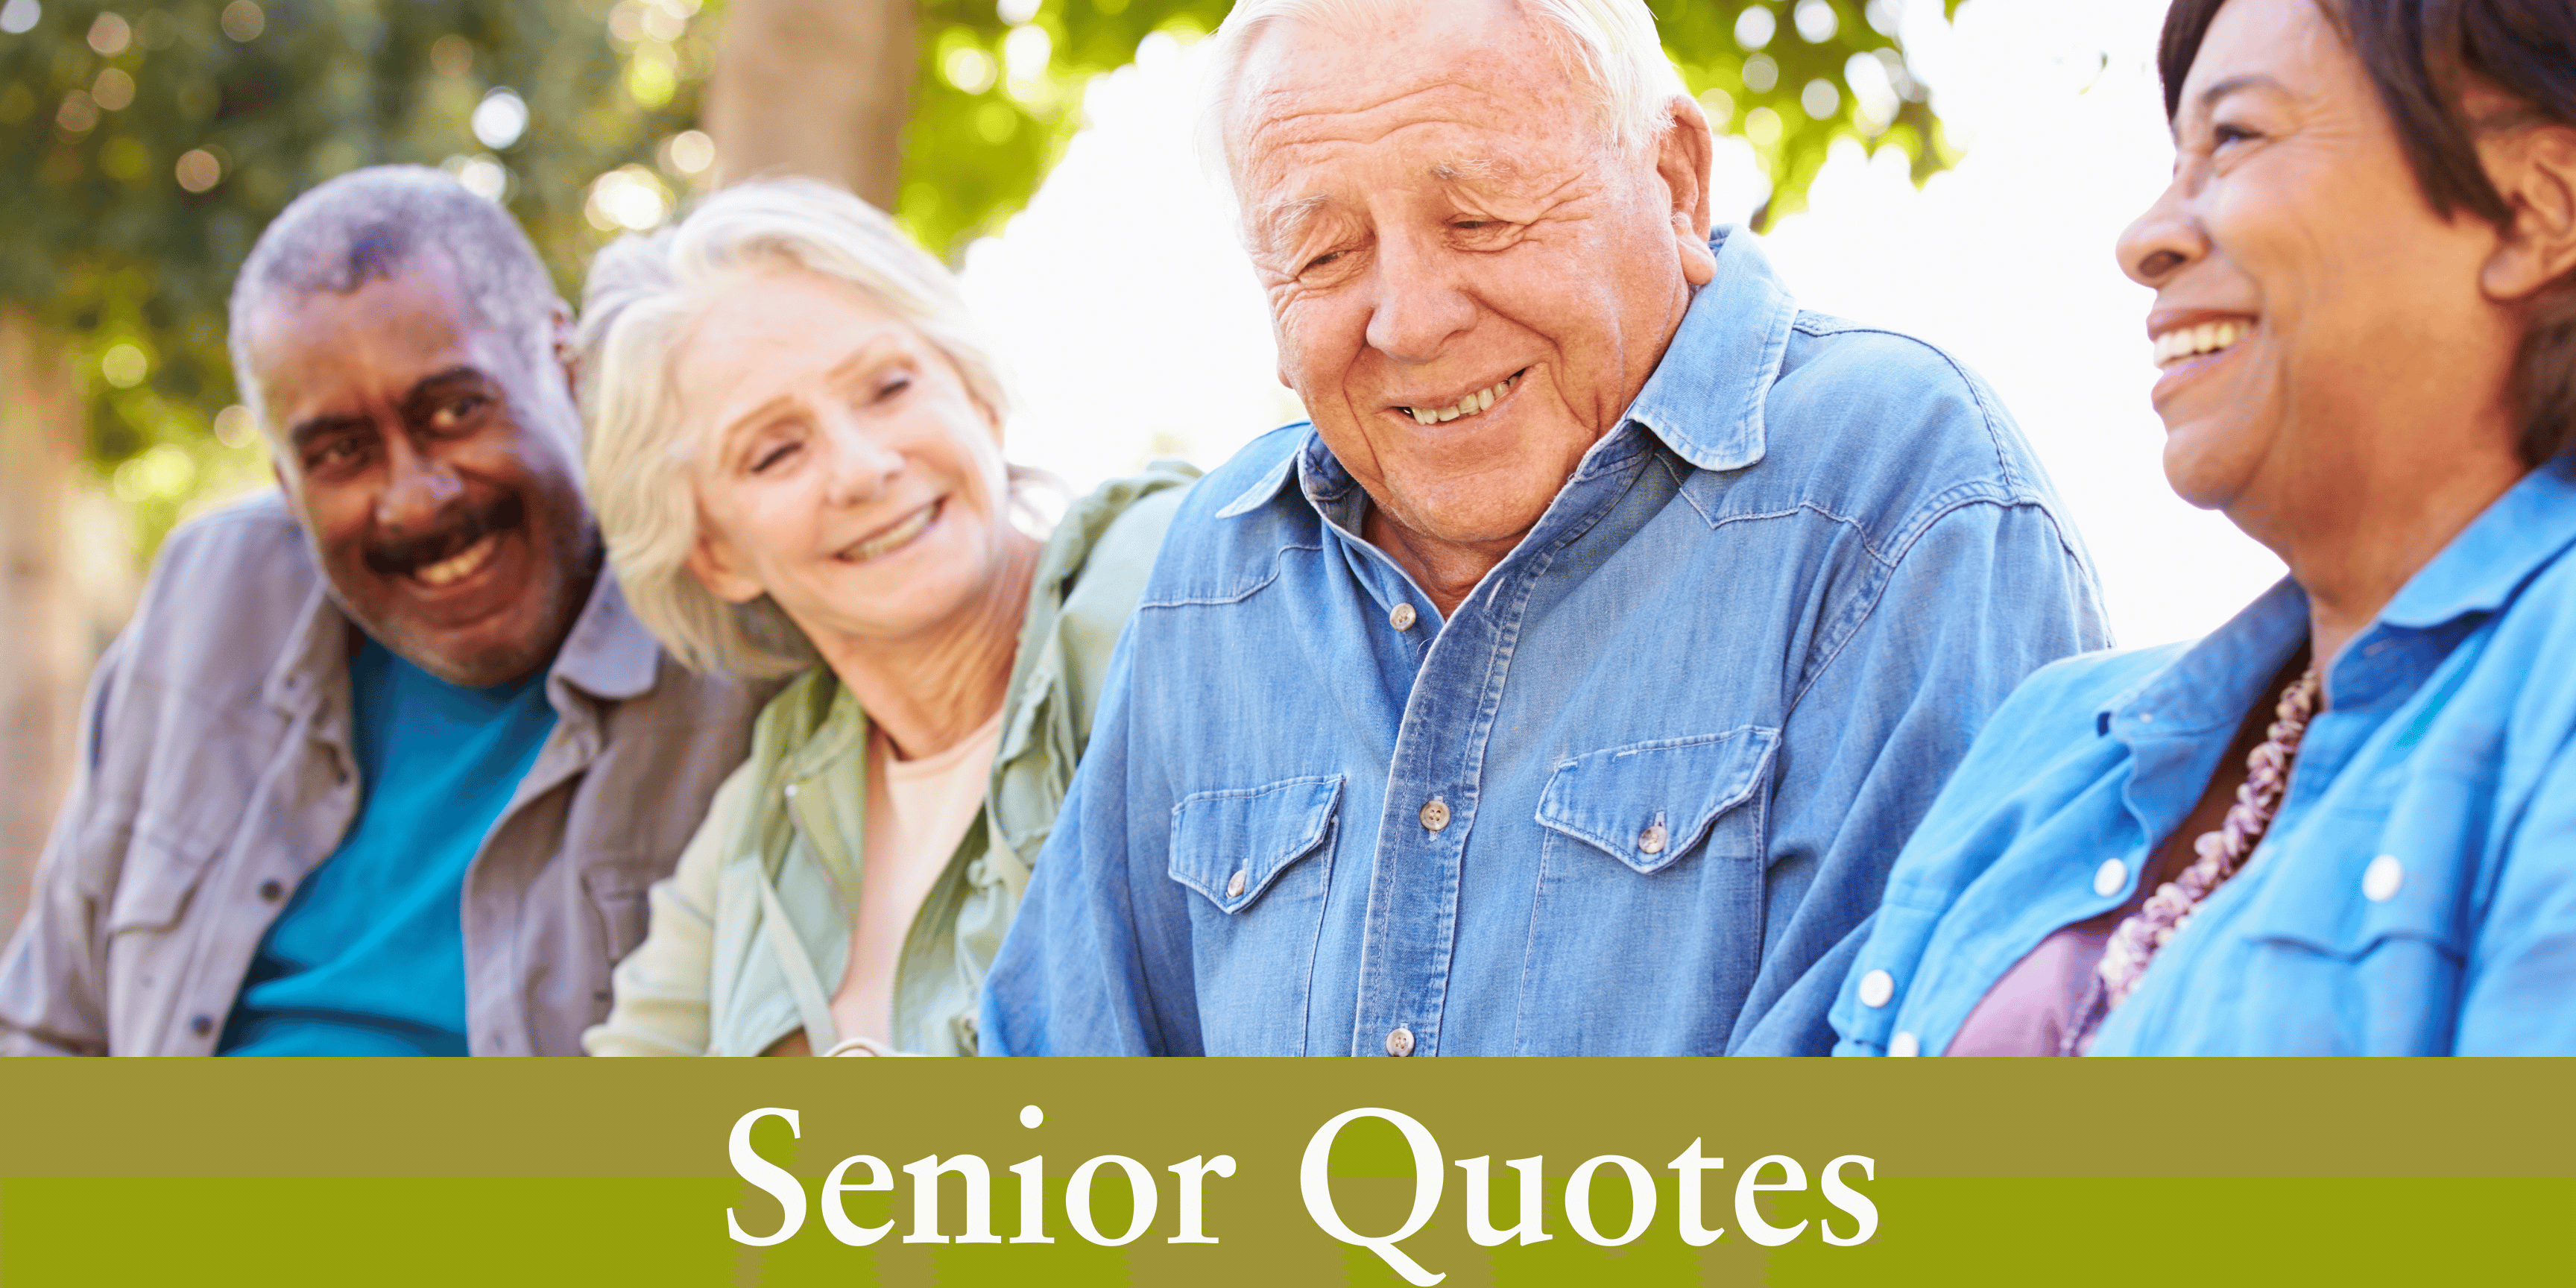 Senior Quotes: The Best, Funniest, and Most Memorable